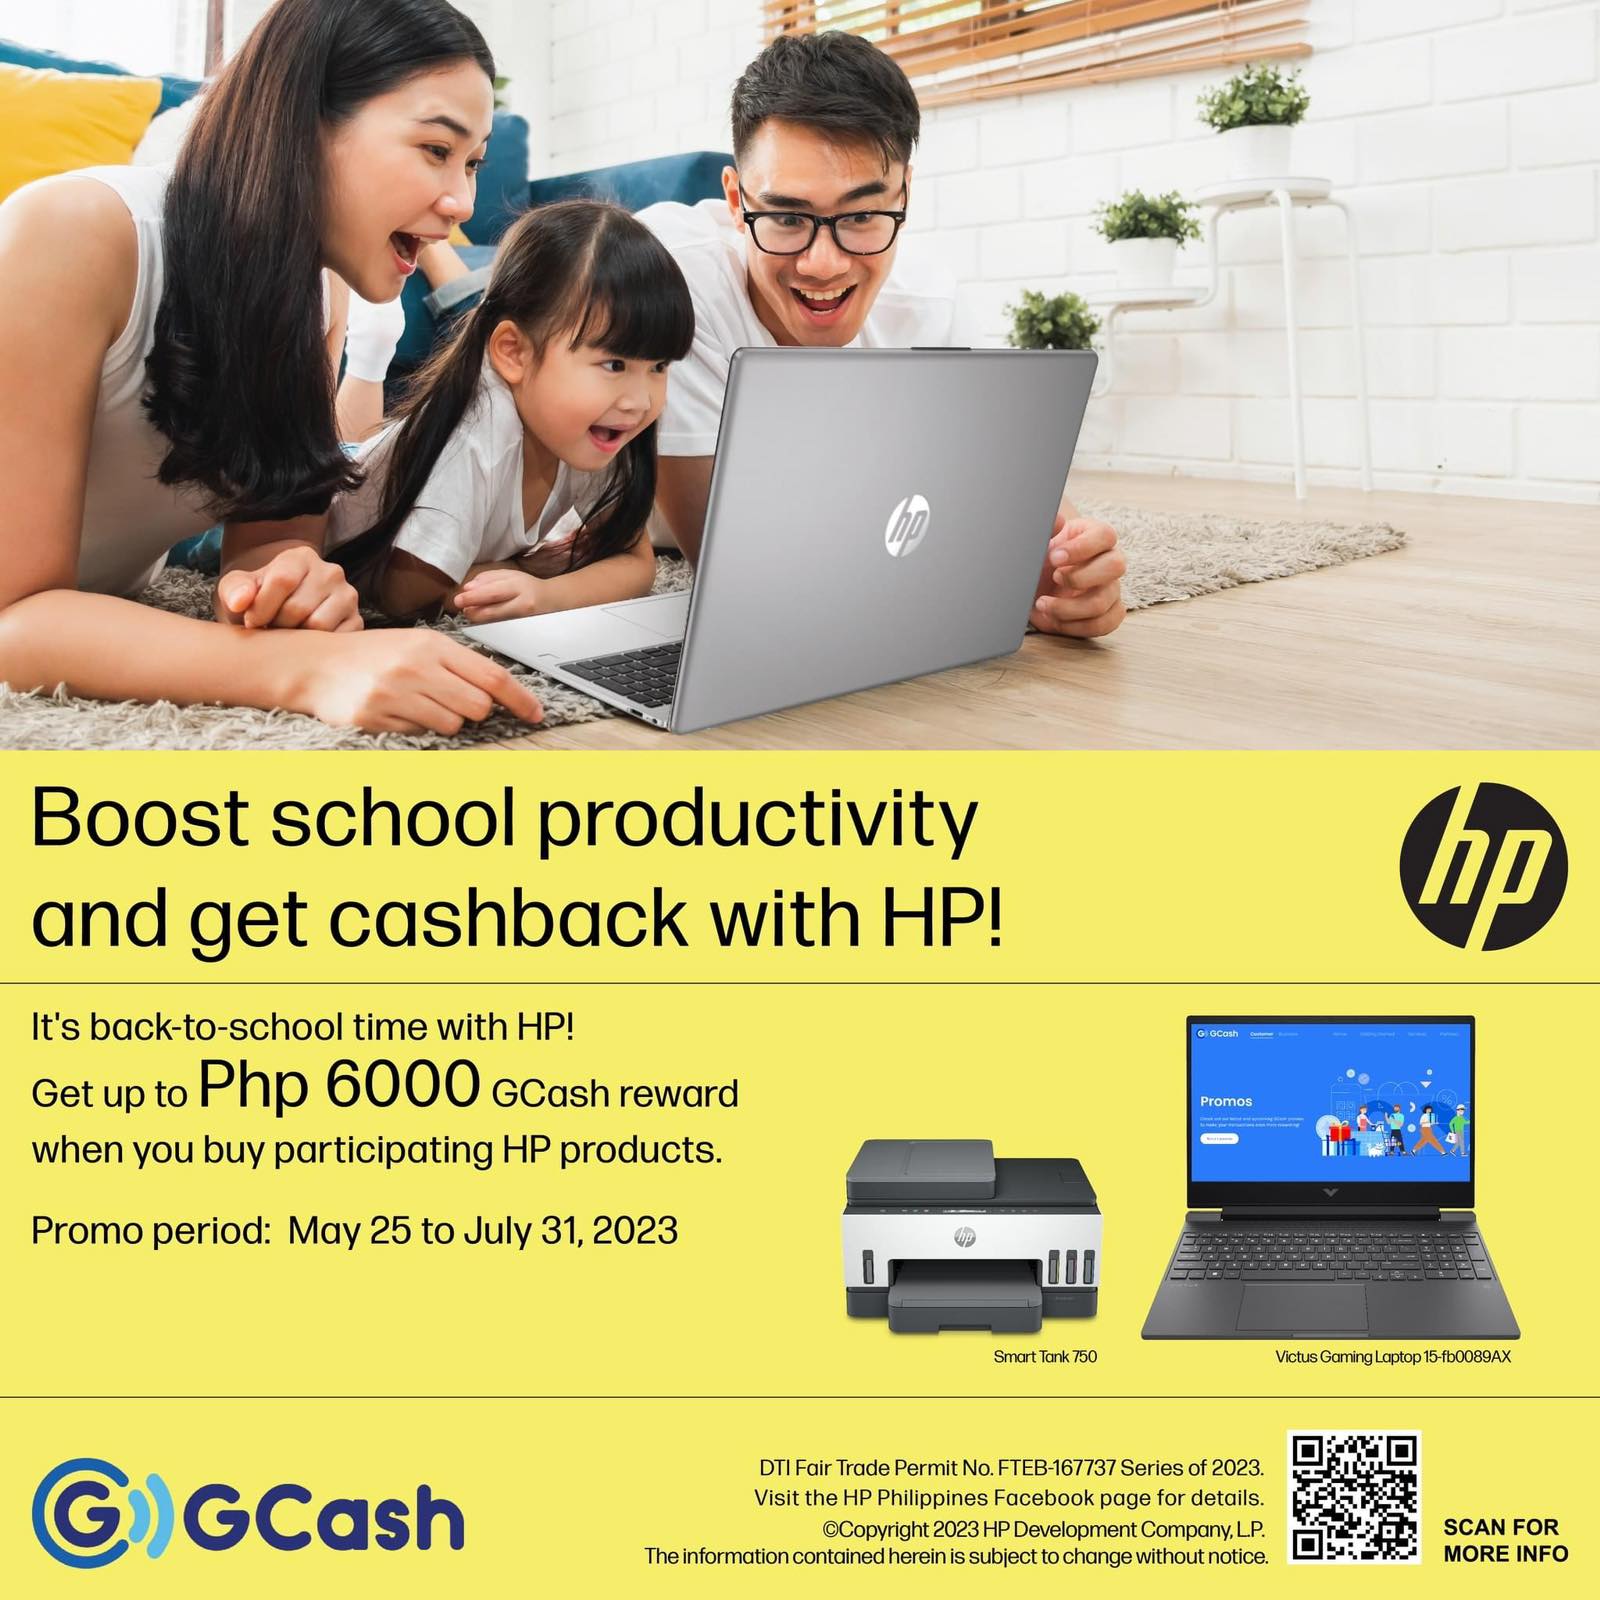 Up to P2,000 GCash, cashback can be yours with an HP Smart Tank Printer